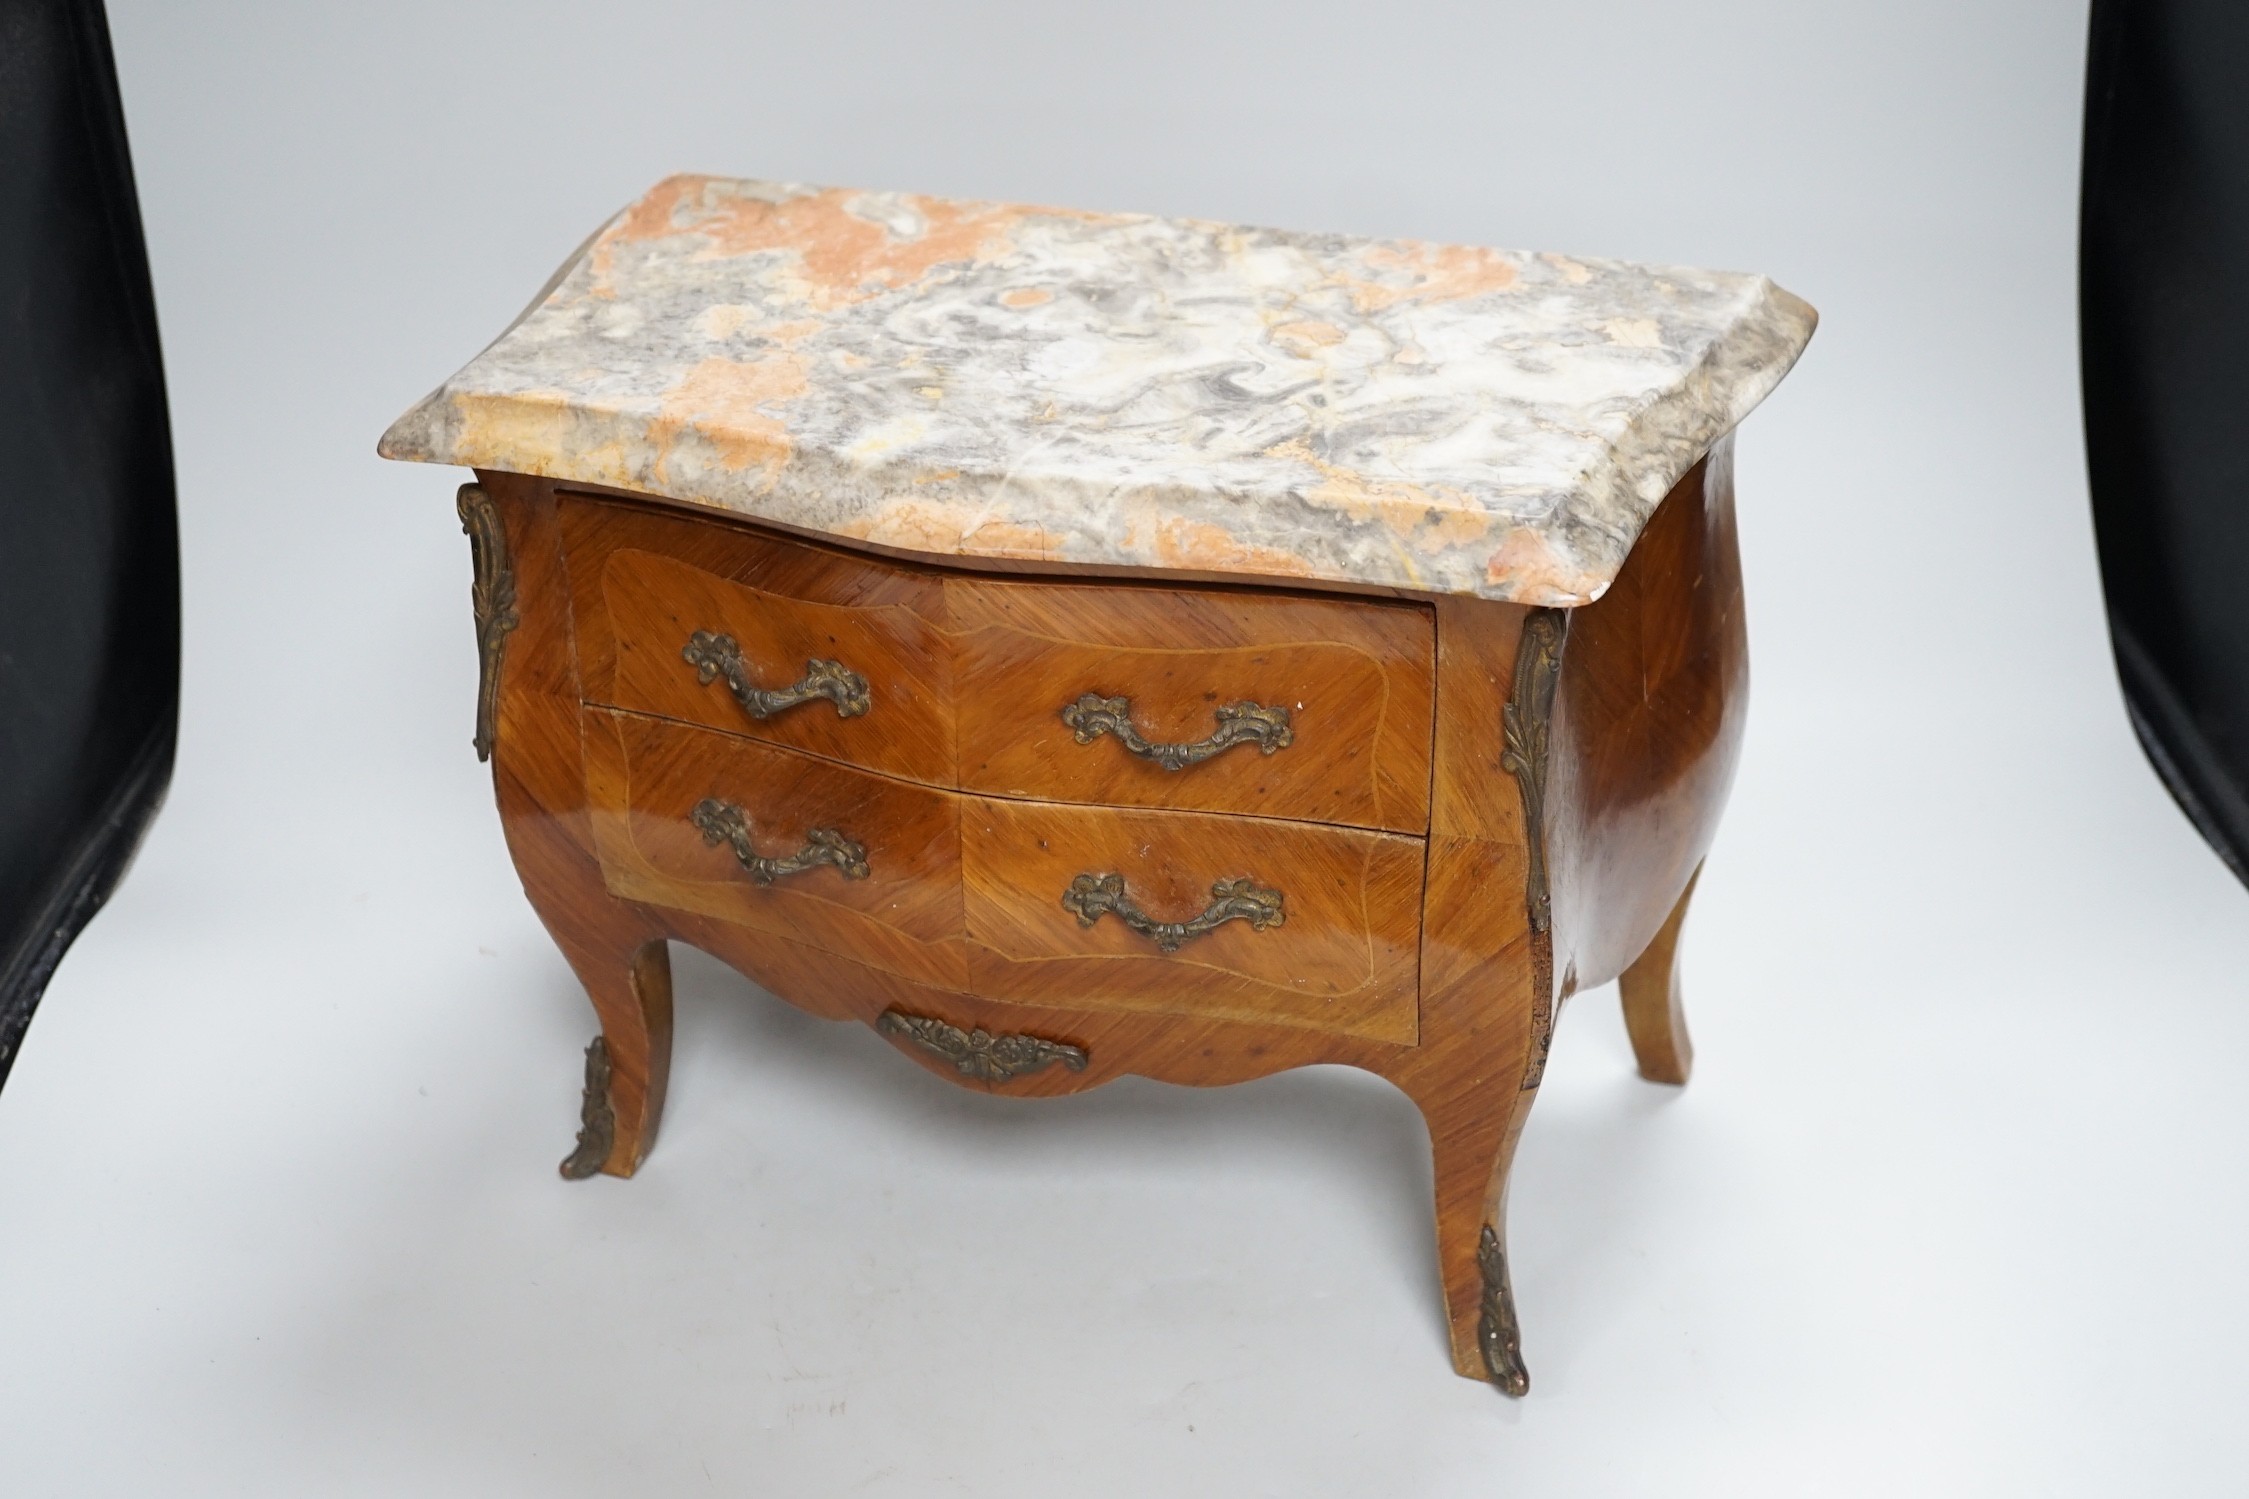 An Apprentice piece: Louis XV style miniature bowfronted French chest, with gilt mounts and pink and grey marble top. 27cm tall, 36cm wide, 17cm deep